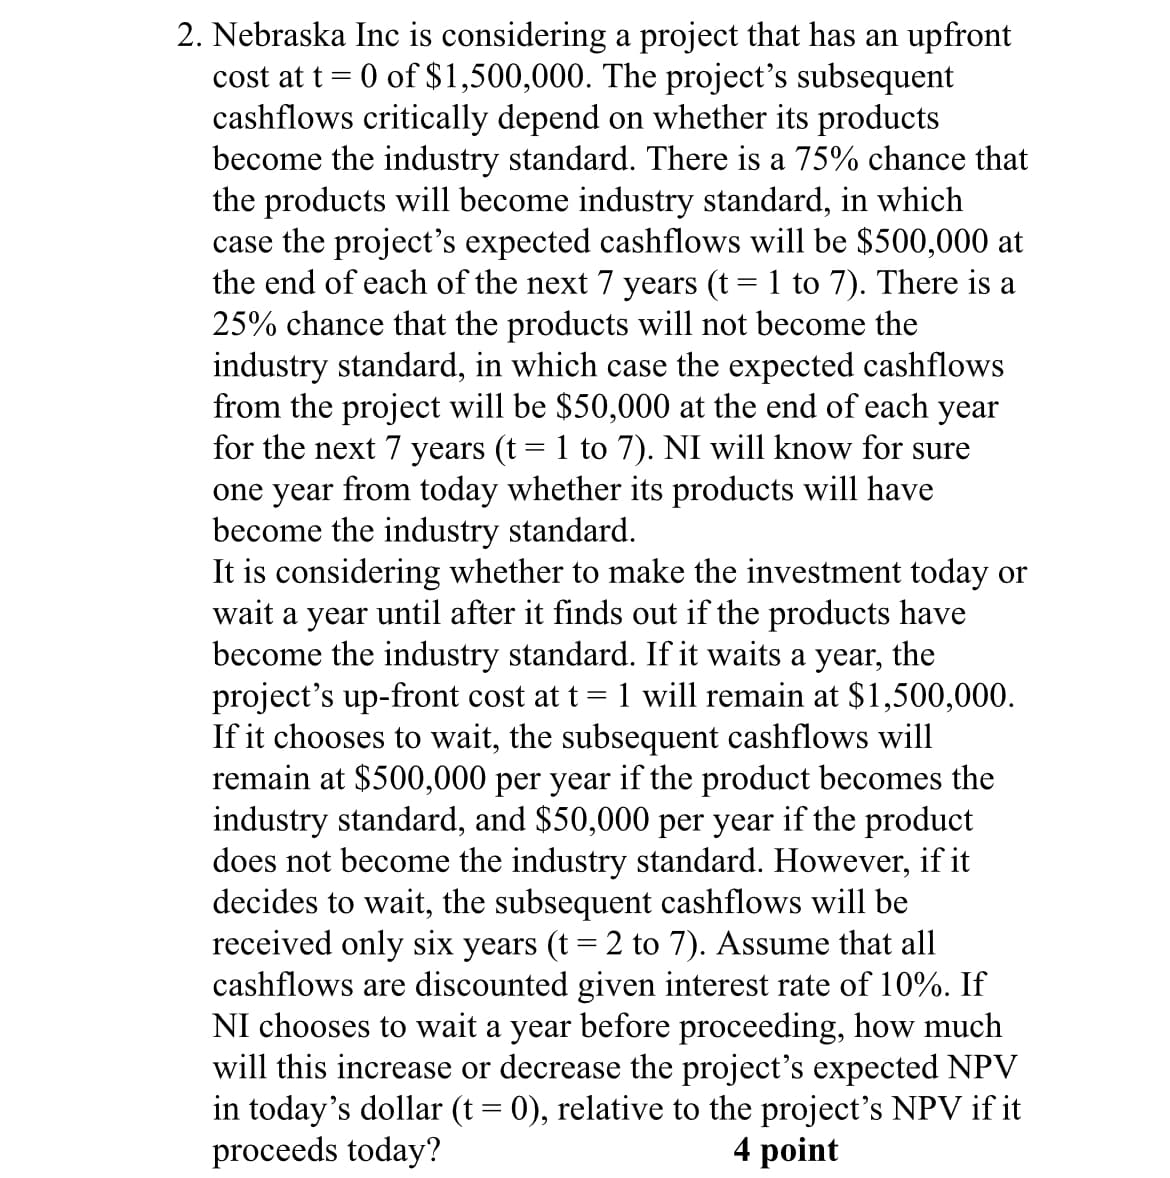 cost at t
=
2. Nebraska Inc is considering a project that has an upfront
0 of $1,500,000. The project's subsequent
cashflows critically depend on whether its products
become the industry standard. There is a 75% chance that
the products will become industry standard, in which
case the project's expected cashflows will be $500,000 at
the end of each of the next 7 years (t = 1 to 7). There is a
25% chance that the products will not become the
industry standard, in which case the expected cashflows
from the project will be $50,000 at the end of each year
for the next 7 years (t = 1 to 7). NI will know for sure
one year from today whether its products will have
become the industry standard.
=
It is considering whether to make the investment today or
wait a year until after it finds out if the products have
become the industry standard. If it waits a year, the
project's up-front cost at t 1 will remain at $1,500,000.
If it chooses to wait, the subsequent cashflows will
remain at $500,000 per year if the product becomes the
industry standard, and $50,000 per year if the product
does not become the industry standard. However, if it
decides to wait, the subsequent cashflows will be
received only six years (t = 2 to 7). Assume that all
cashflows are discounted given interest rate of 10%. If
NI chooses to wait a year before proceeding, how much
will this increase or decrease the project's expected NPV
in today's dollar (t = 0), relative to the project's NPV if it
proceeds today?
4 point